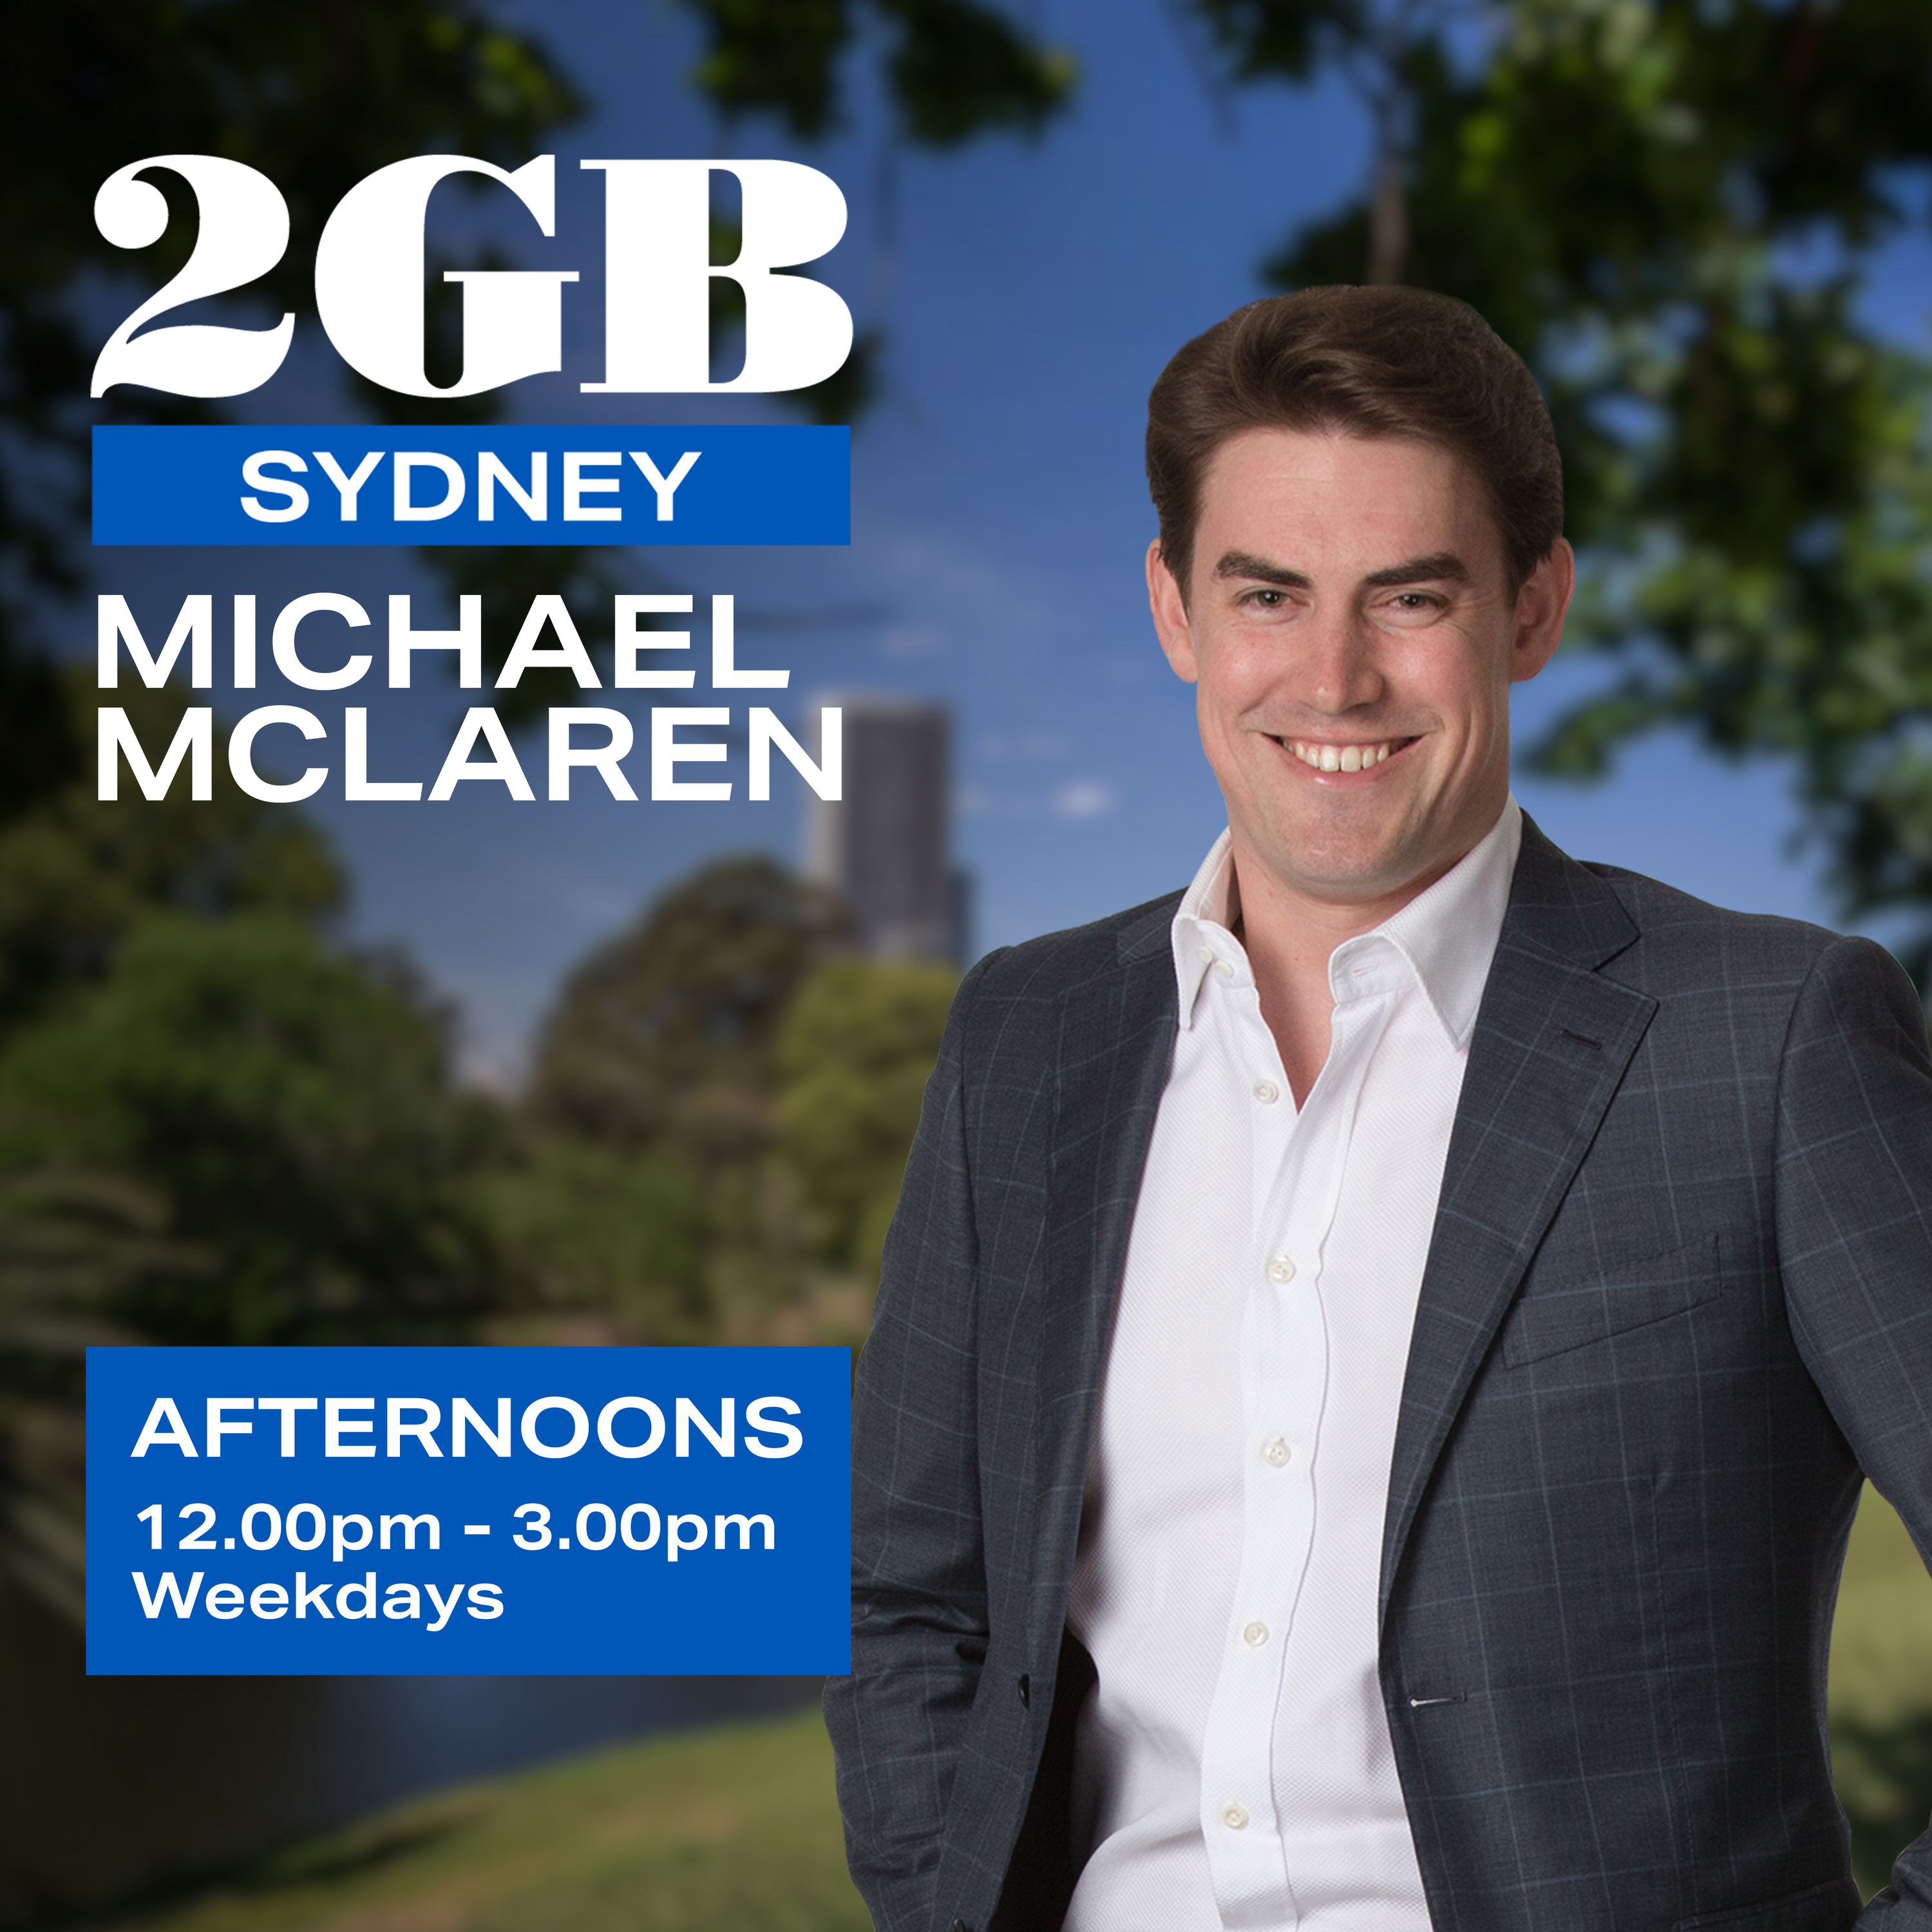 Afternoons with Michael McLaren - Friday, 24th May